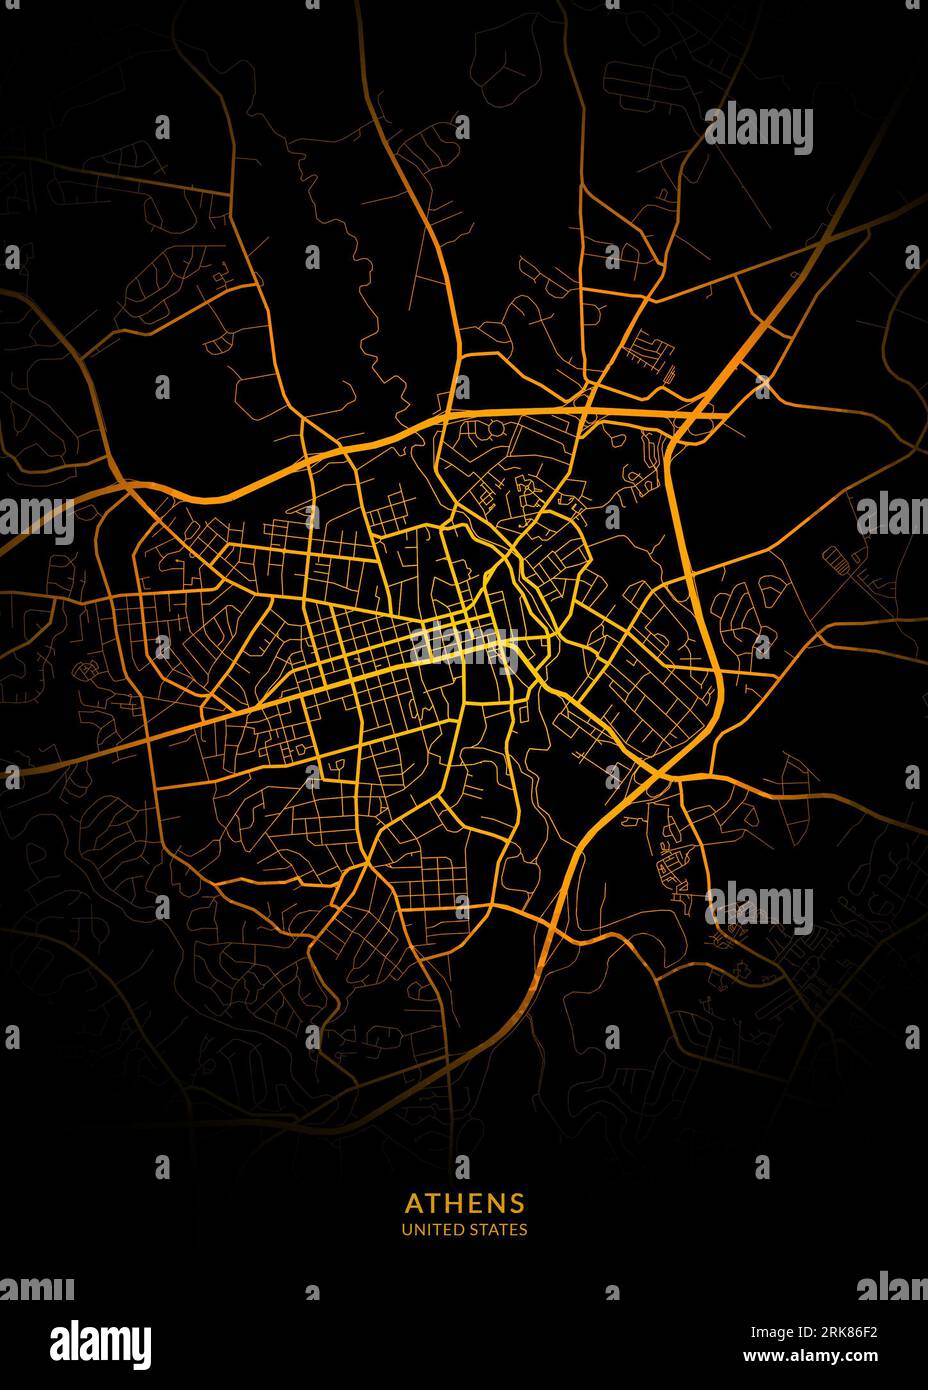 A vector illustration of Athens, USA, featuring a map of the city with orange roads on a black background Stock Photo